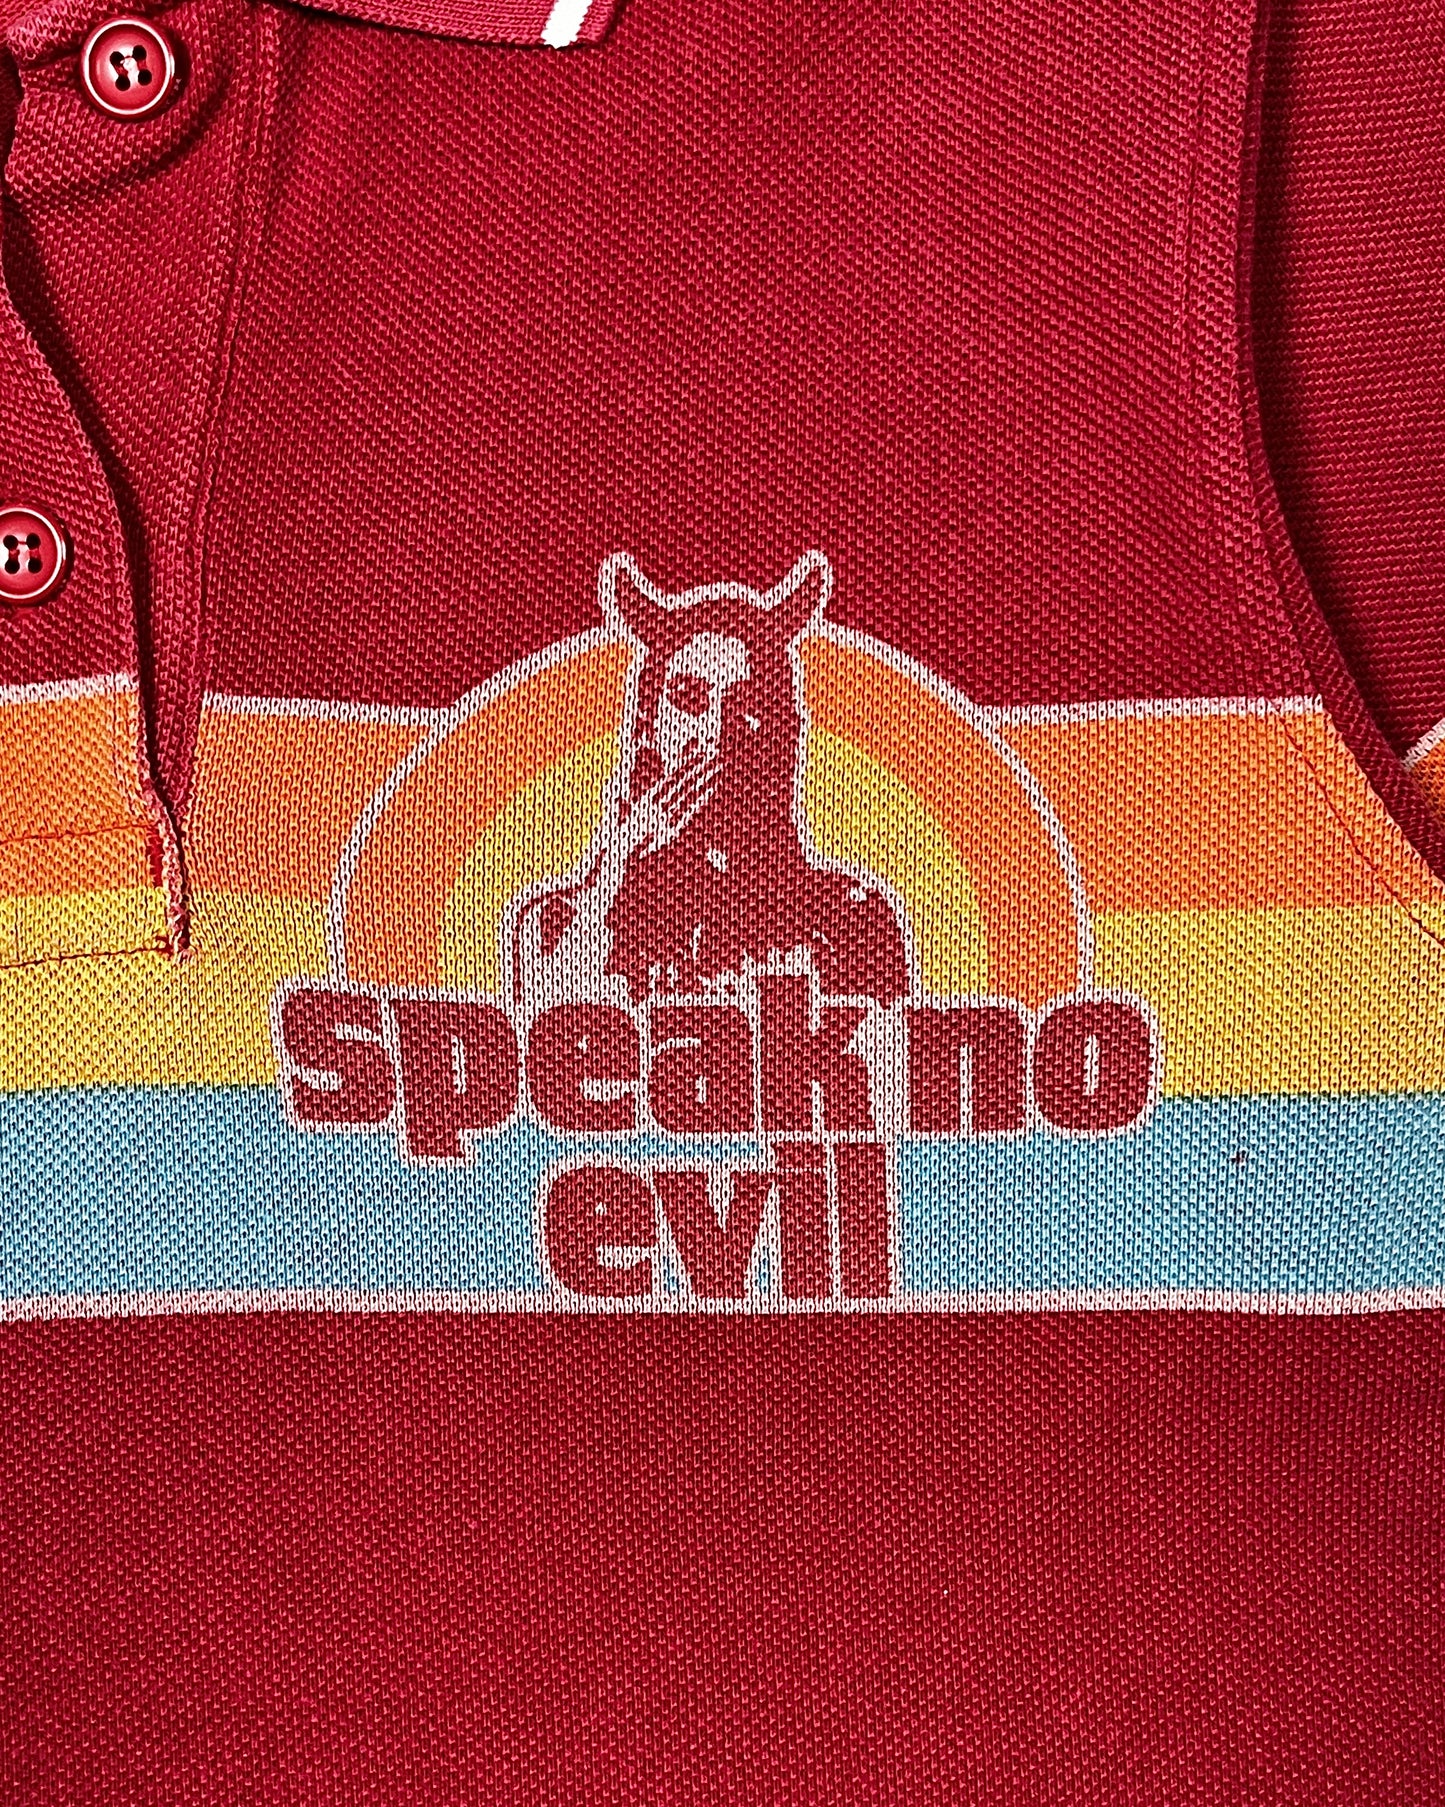 Hysteric Glamour "Speak No Evil" Polo Shirt